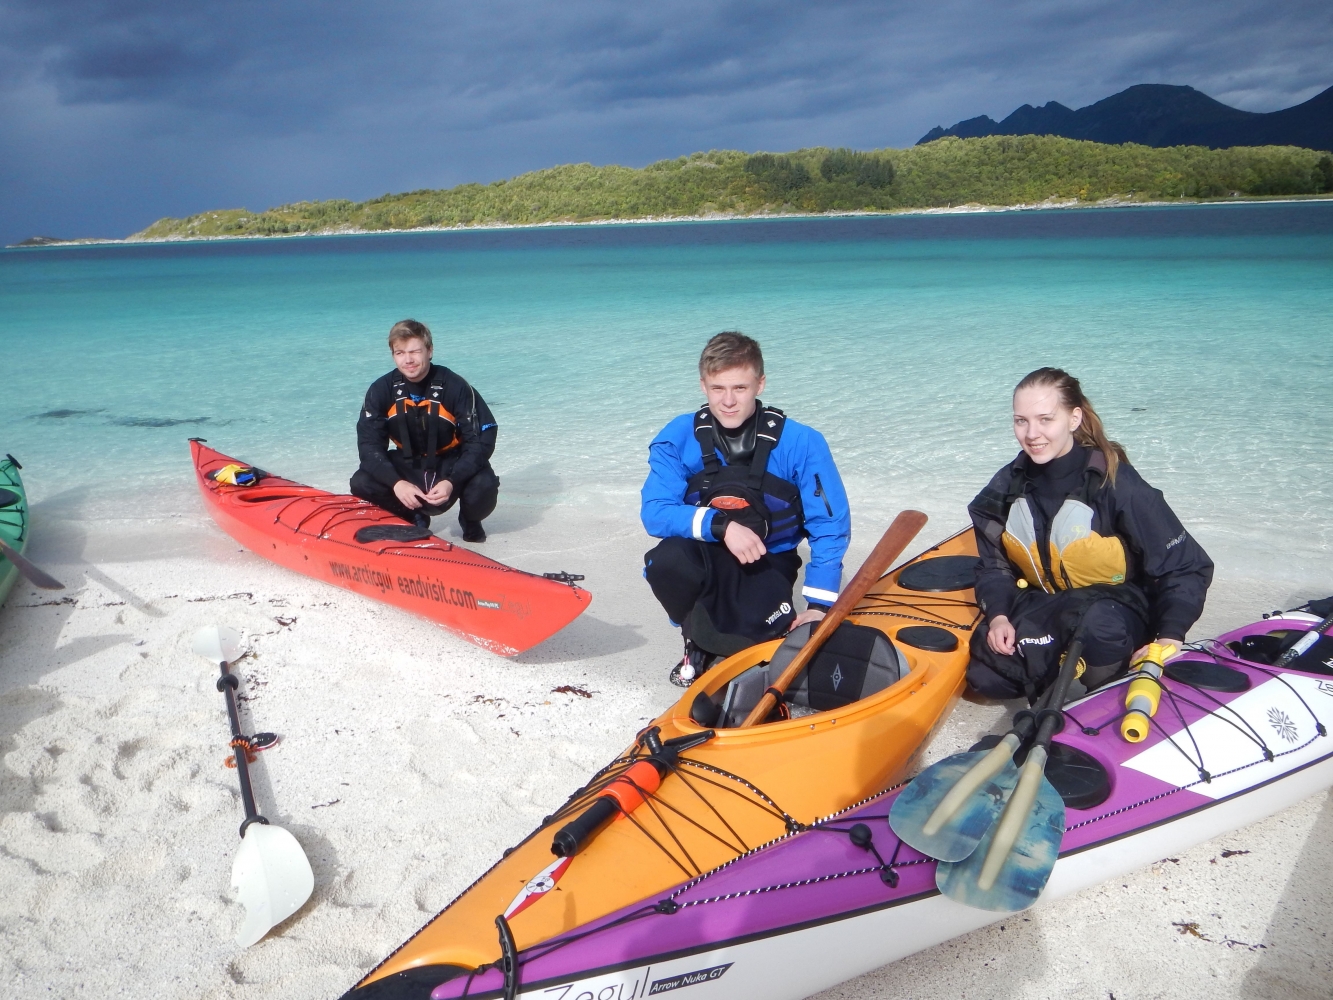 Participants preparing to go kayaking on a white sandy beach